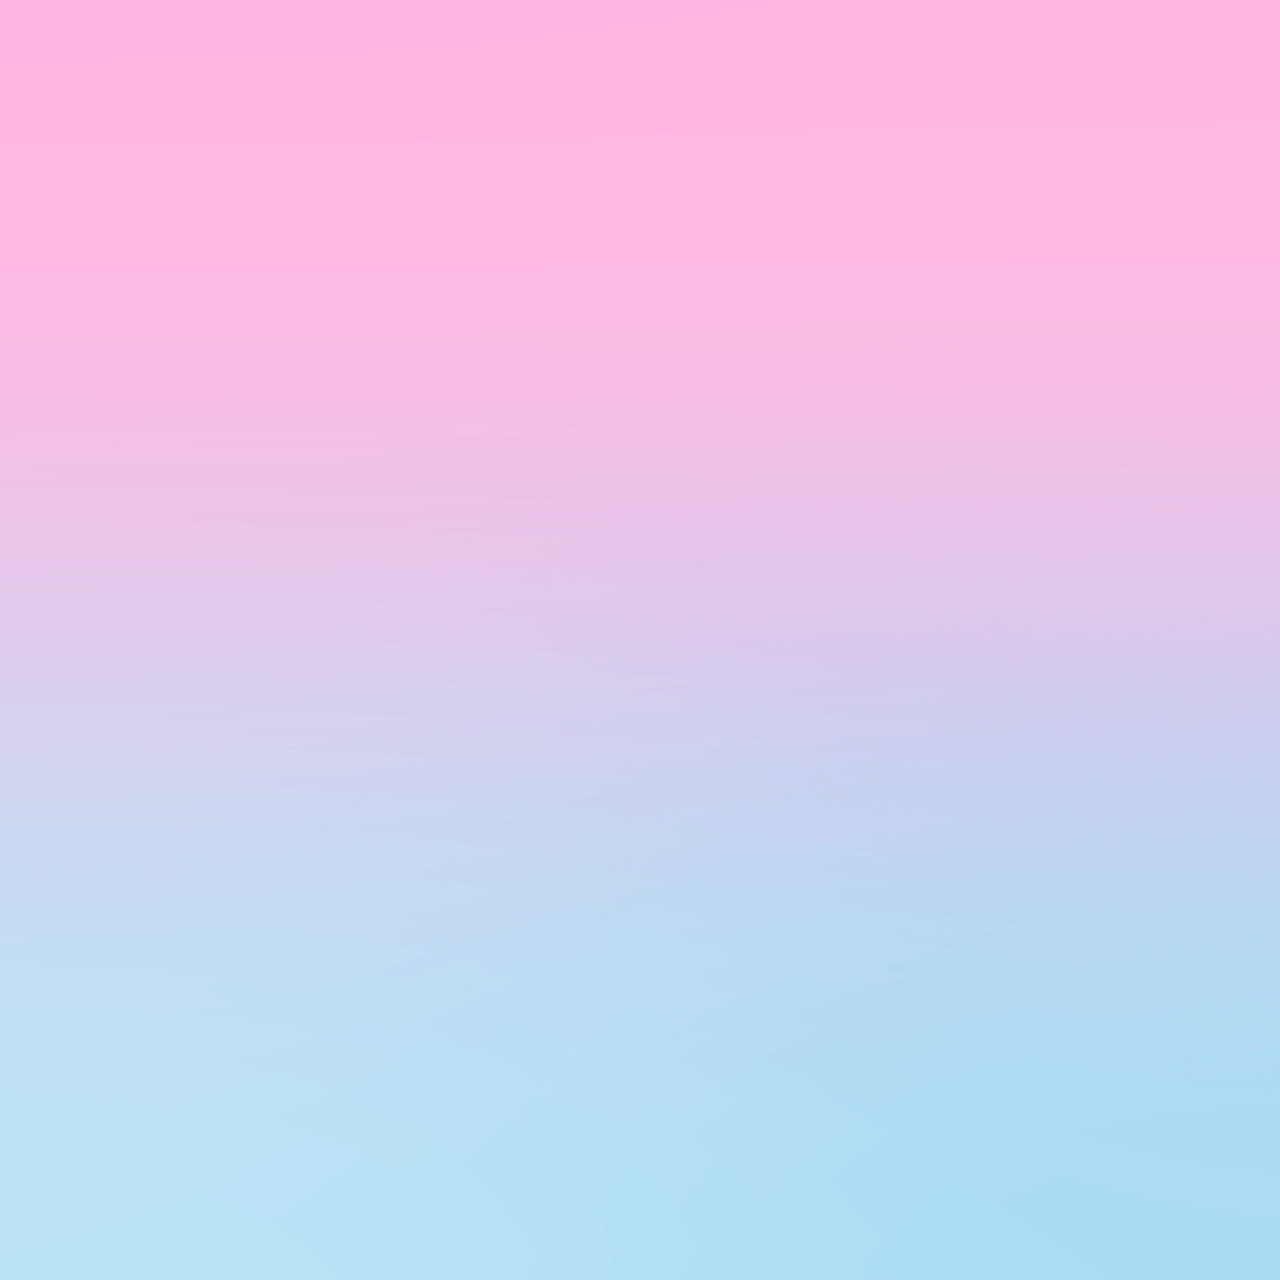 Pastel Pink Ombre Wallpapers - Top Free Pastel Pink Ombre Backgrounds ...